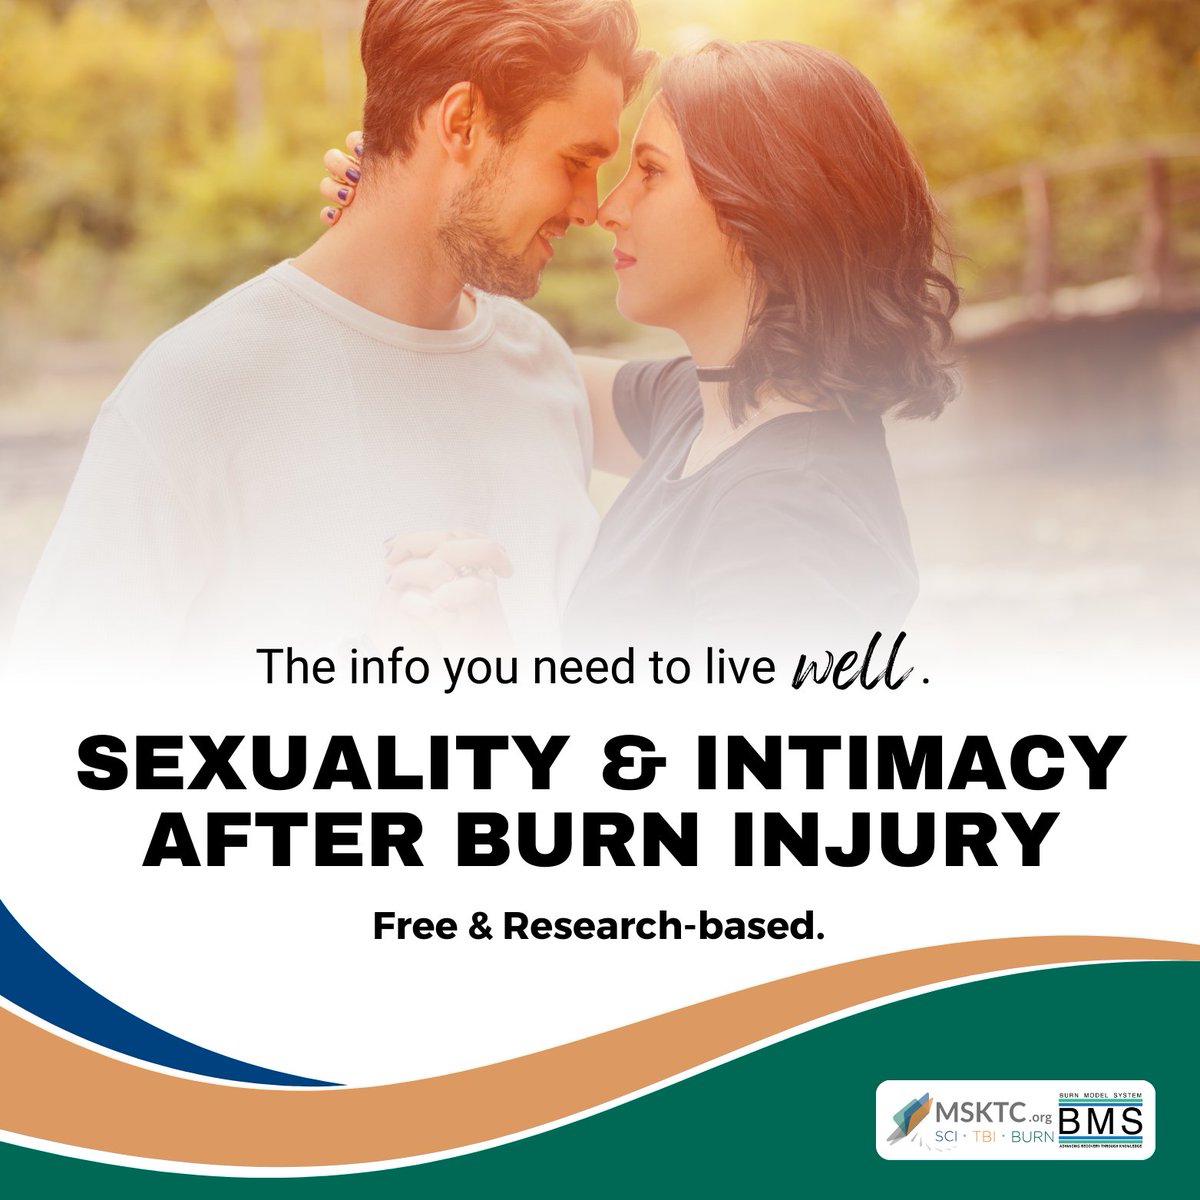 This suite of resources aims to help individuals with #burninjury understand the importance of openly discussing physical and emotional components related to sexuality and intimacy after burn injury. msktc.org/burn/Hot-Topic…